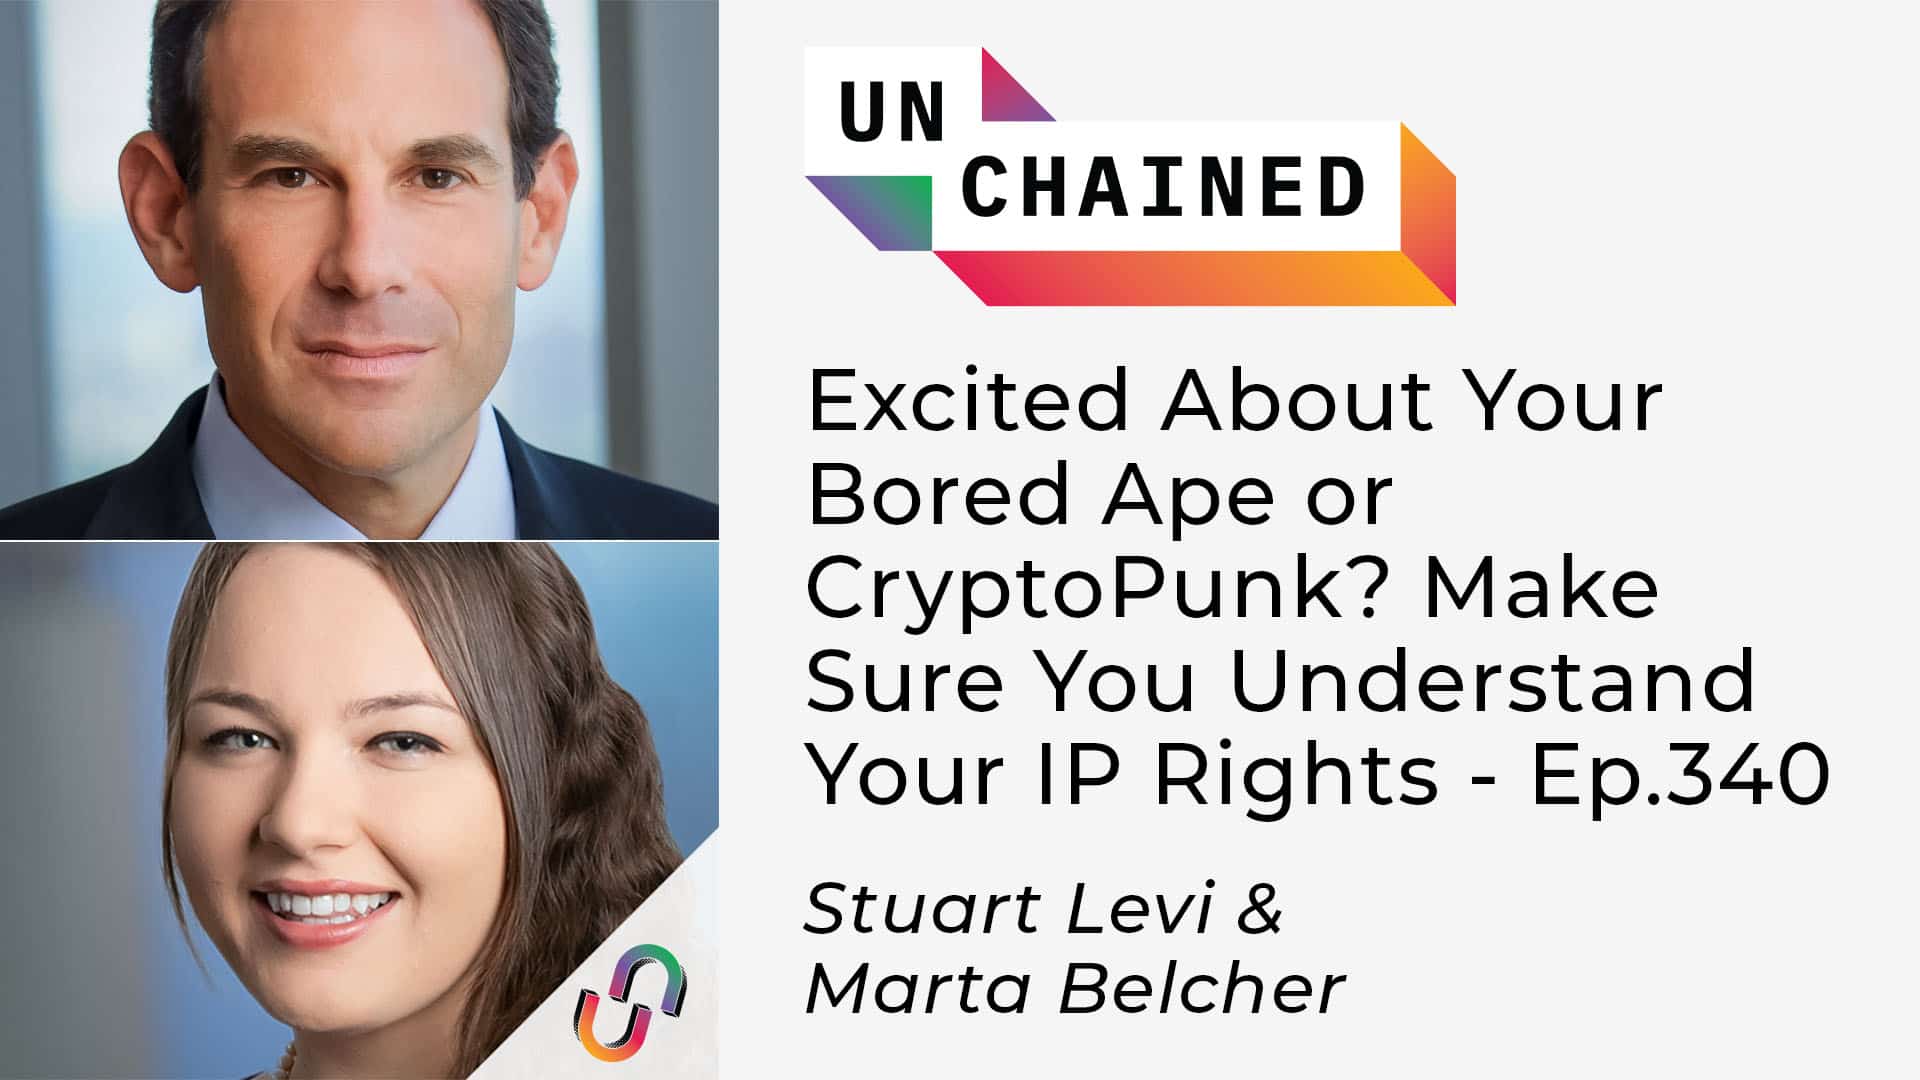 Unchained - Ep.340 - Excited About Your Bored Ape or CryptoPunk - Make Sure You Understand Your IP Rights